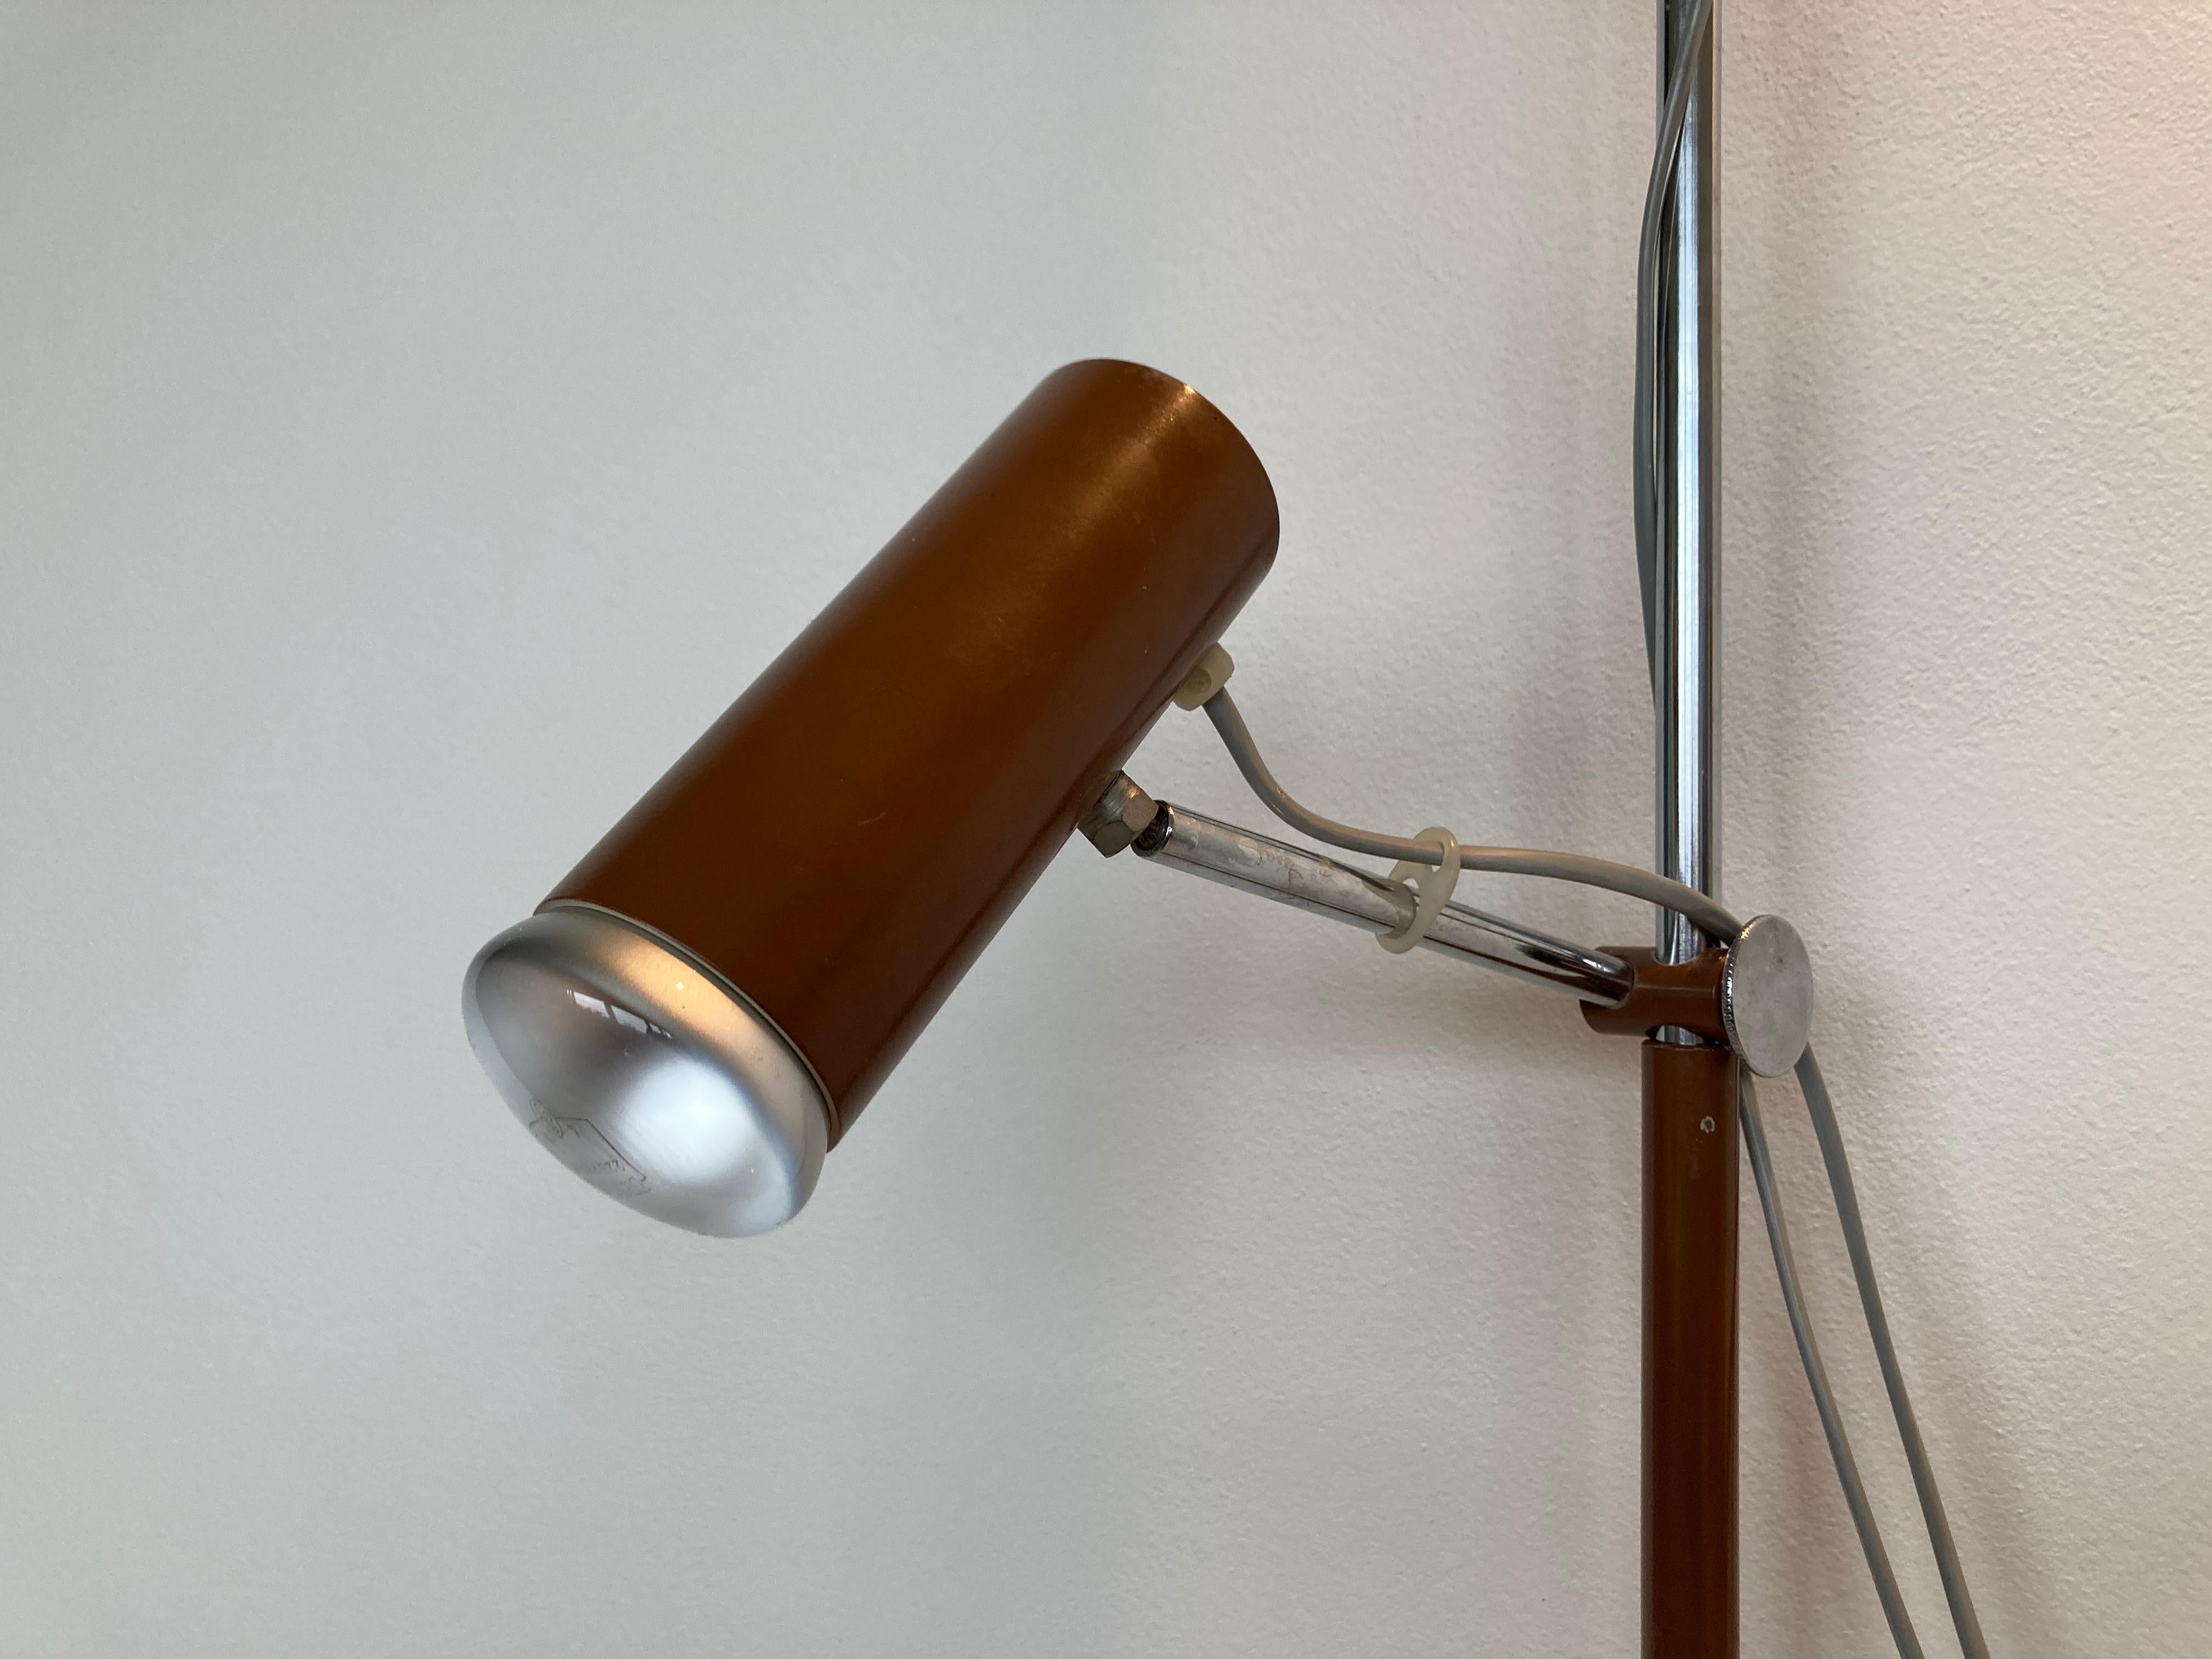 Czech Rare Midcentury Floor to Ceiling Lamp by Josef Hůrka for Napako, 1960s For Sale